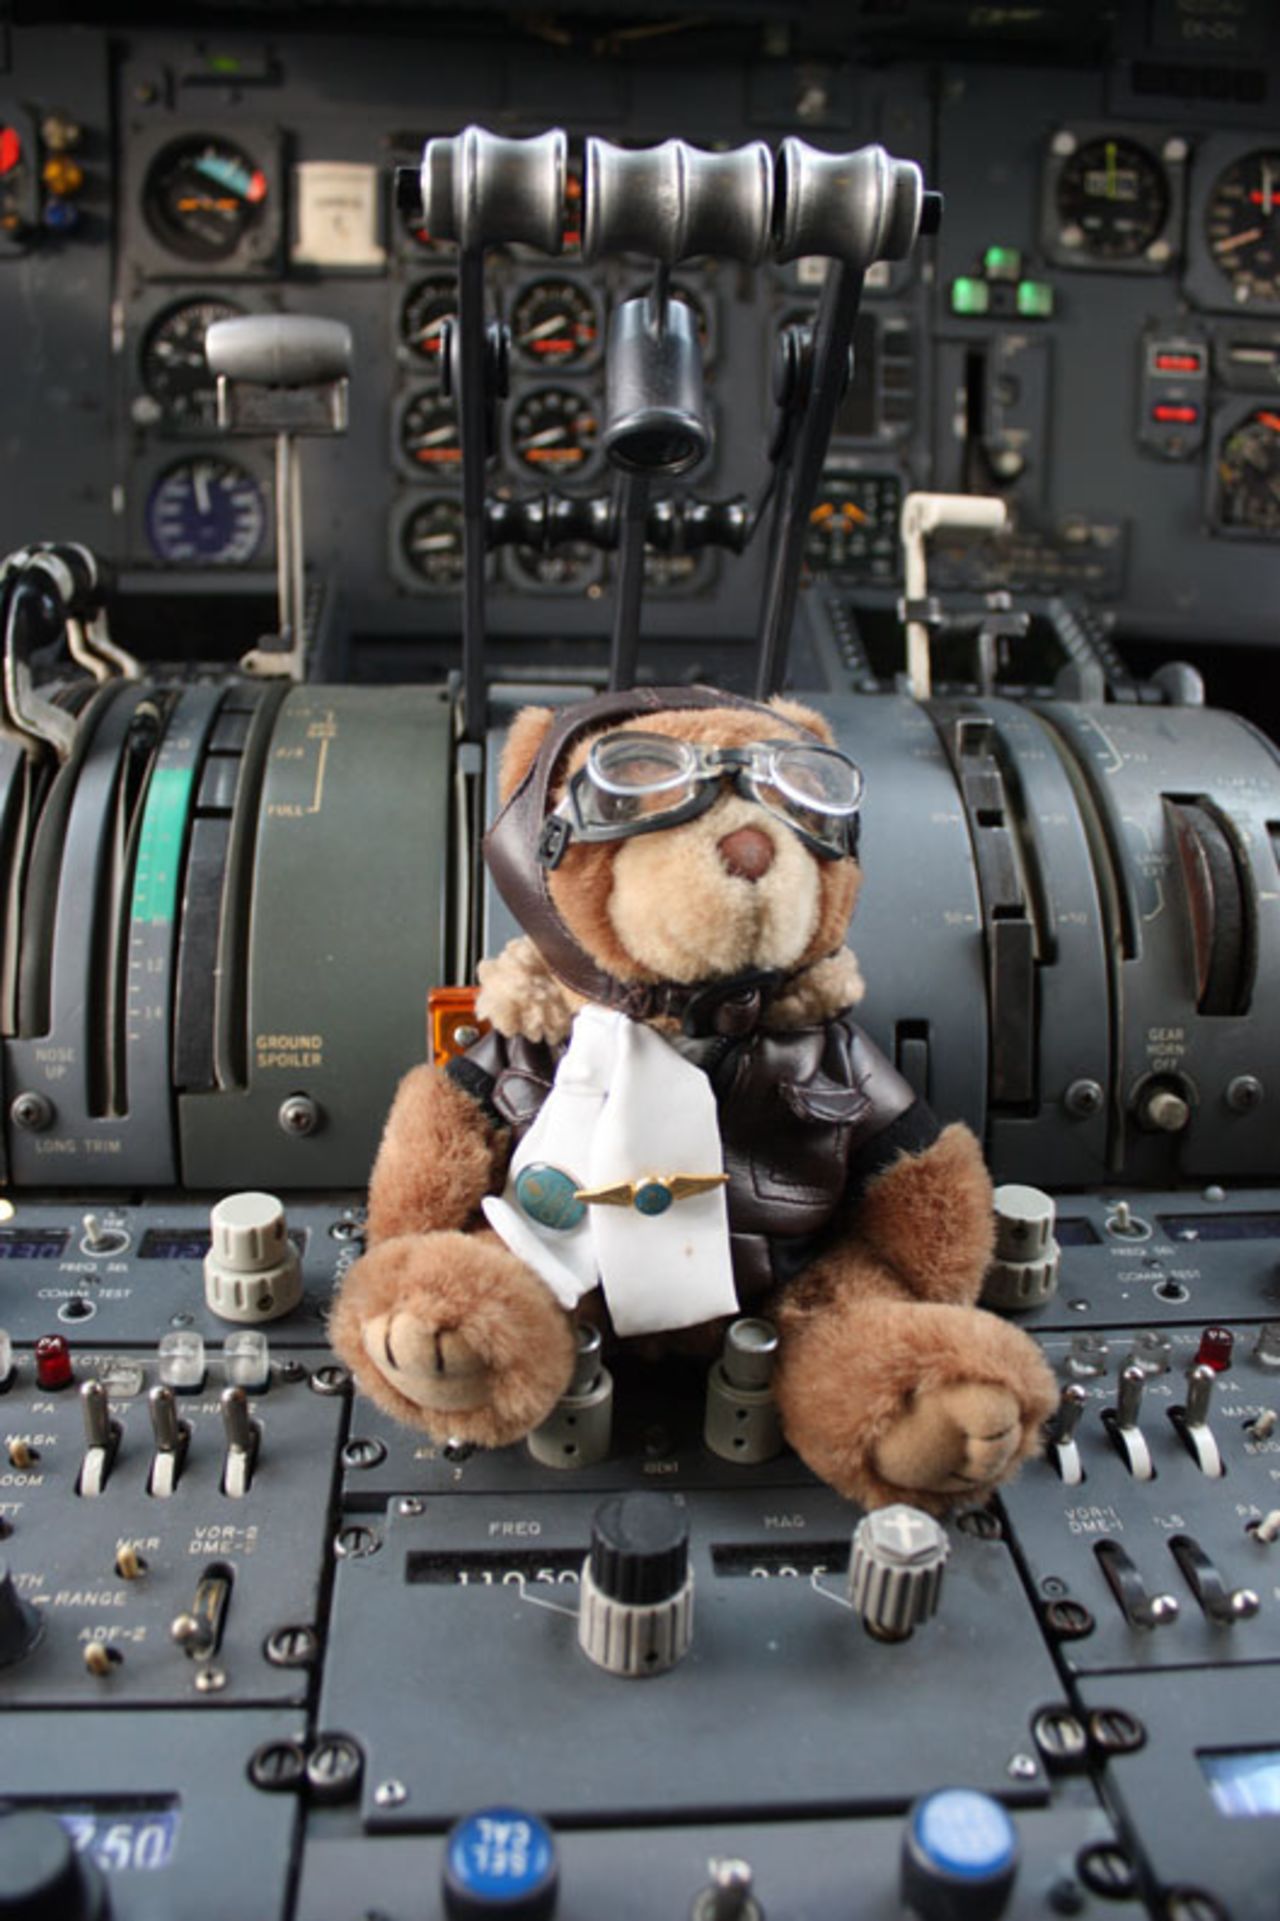 The ORBIS mascot teddy is ready for take off.